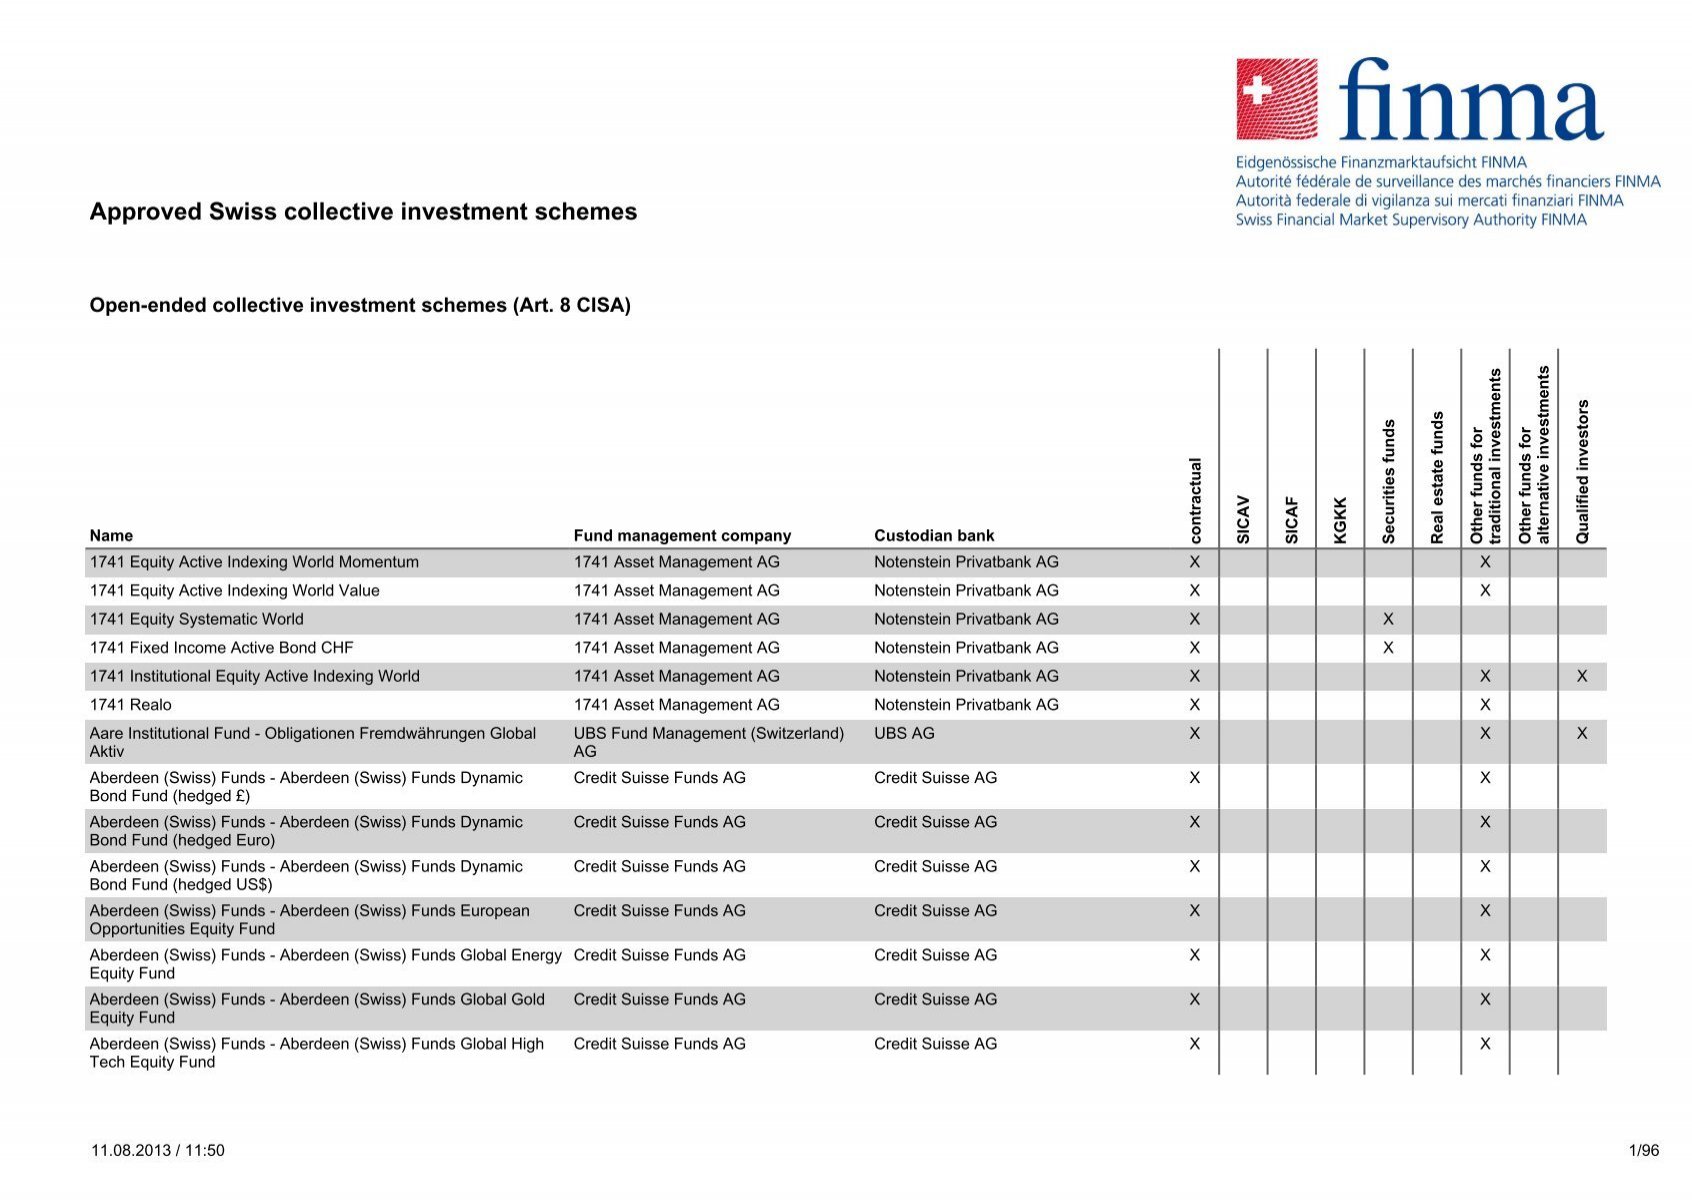 Approved Swiss Collective Investment Schemes Finma